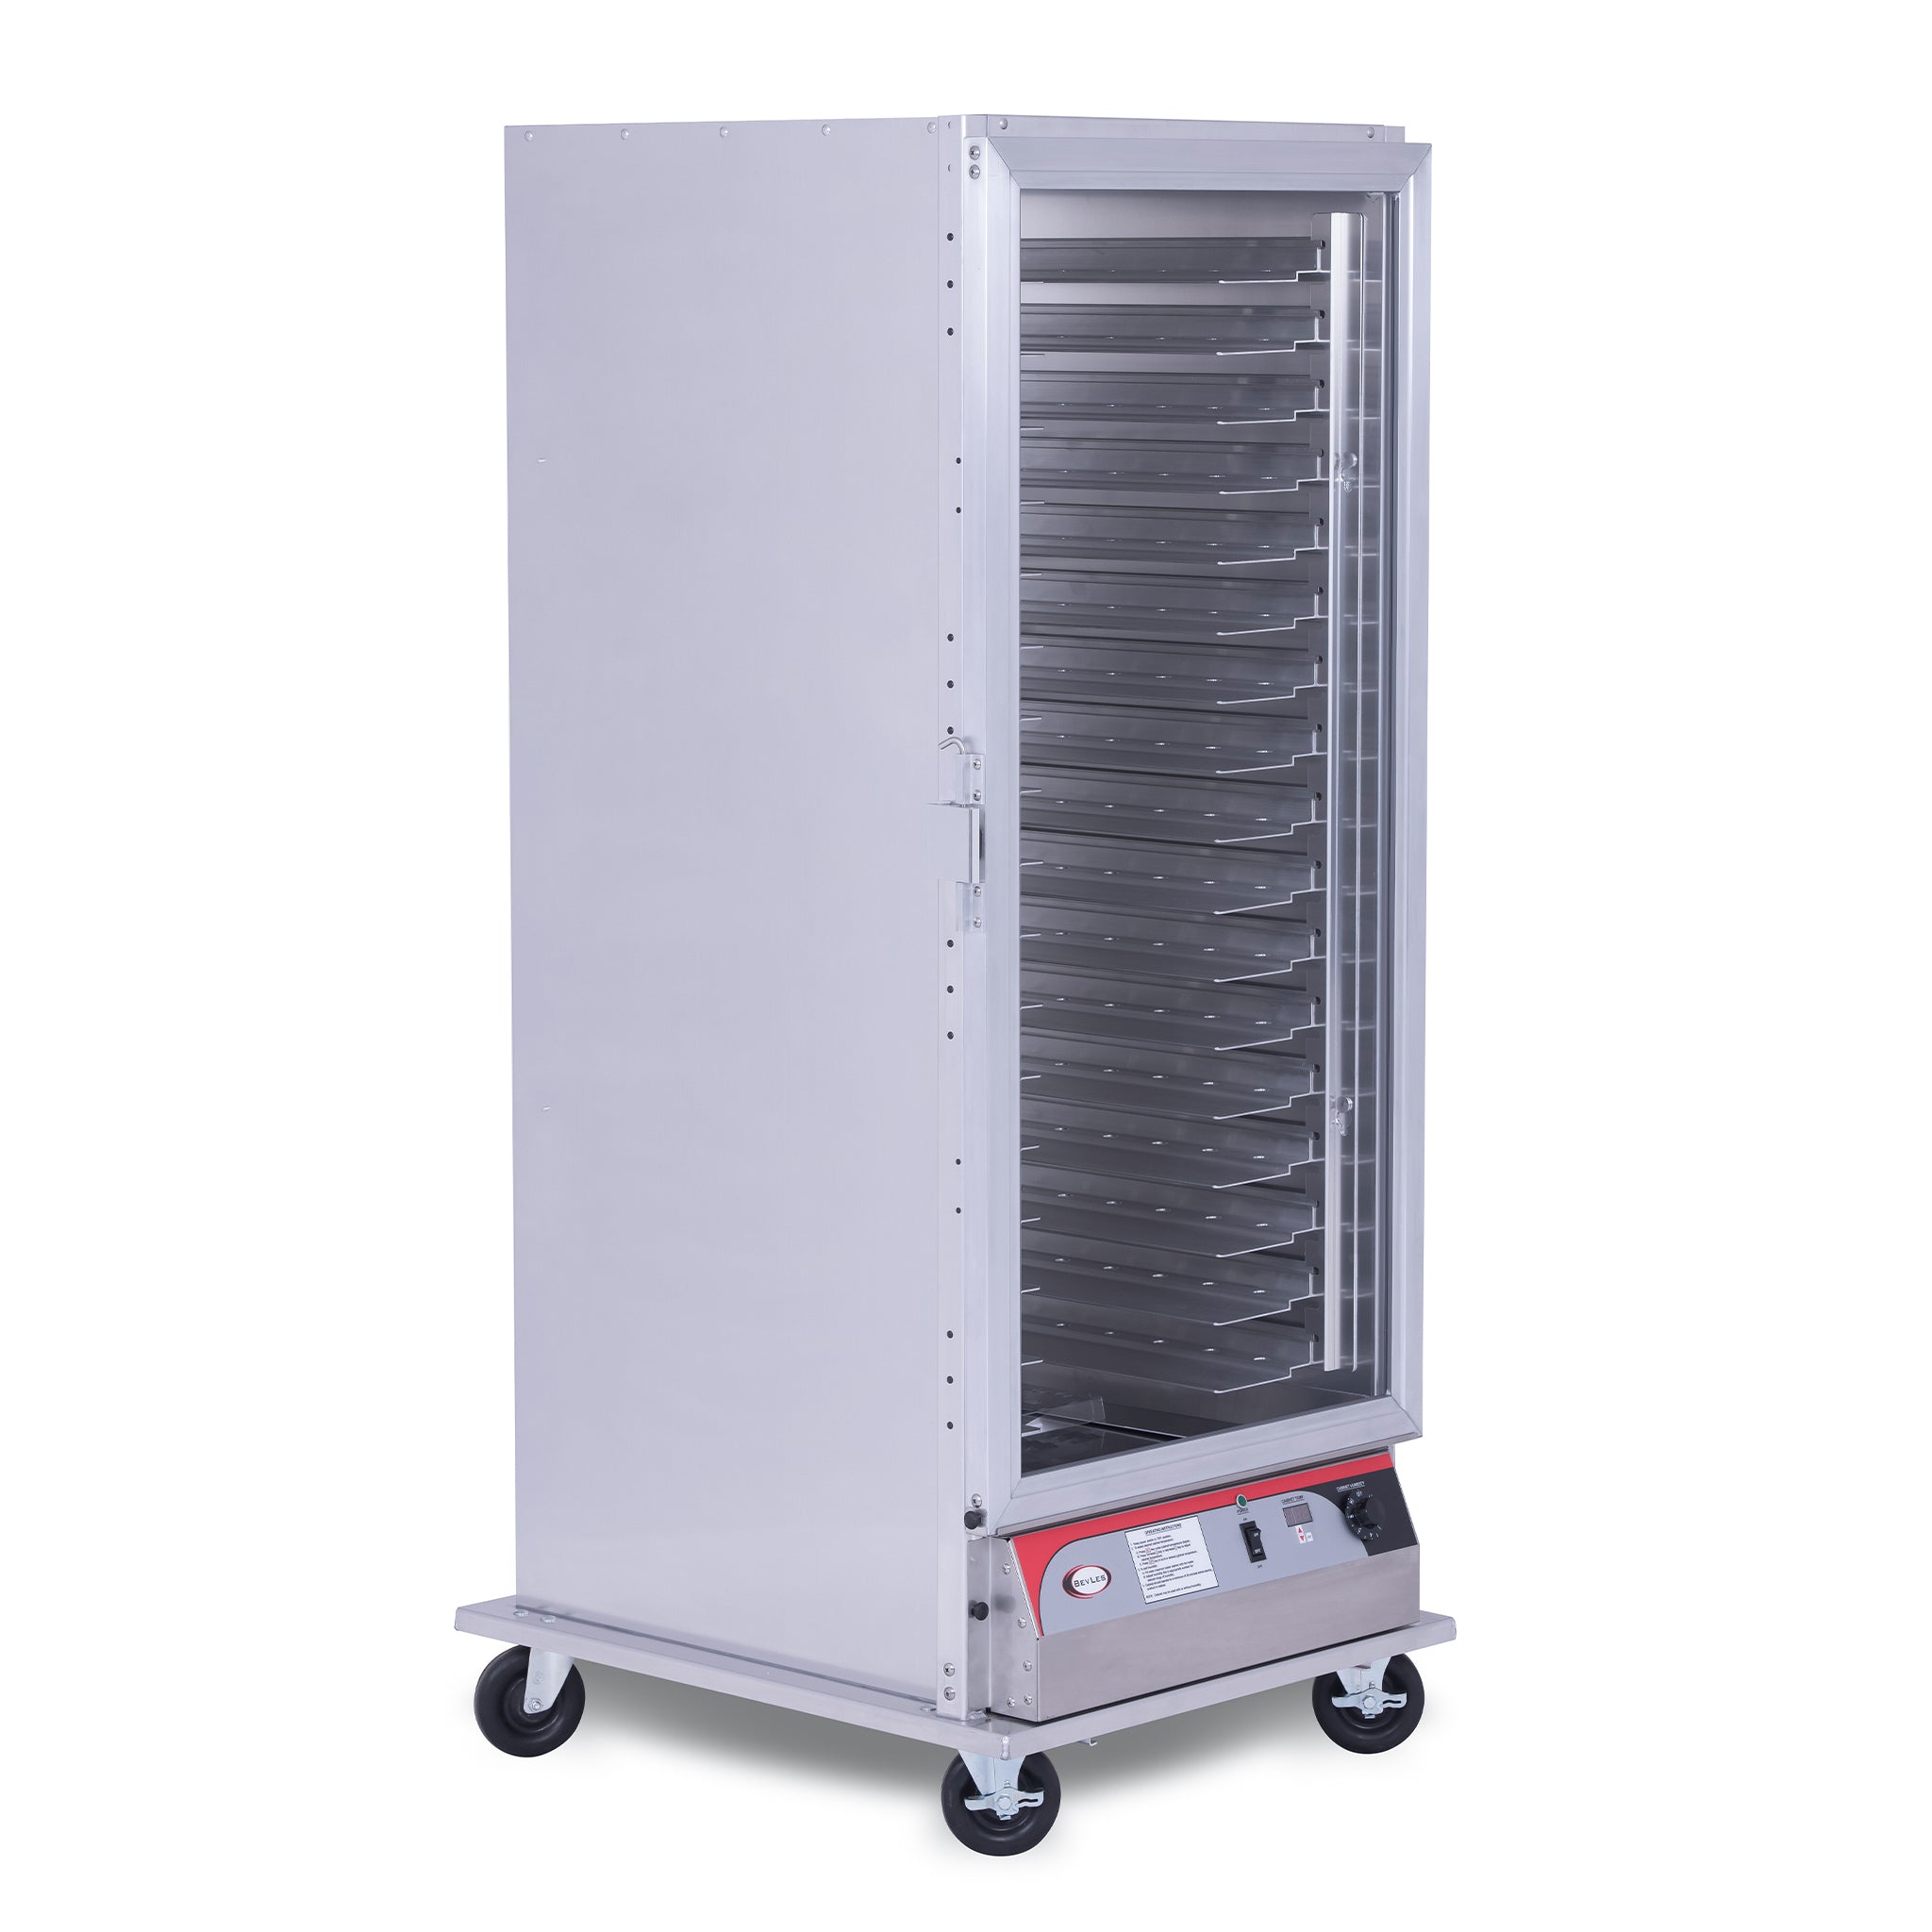 BevLes - PICA70-32-AED-1R3, BevLes Full Size Extra Deep Non-Insulated PICA Proofing Cabinet, 115V, Right Hand Hinge, 3 Doors, in Silver